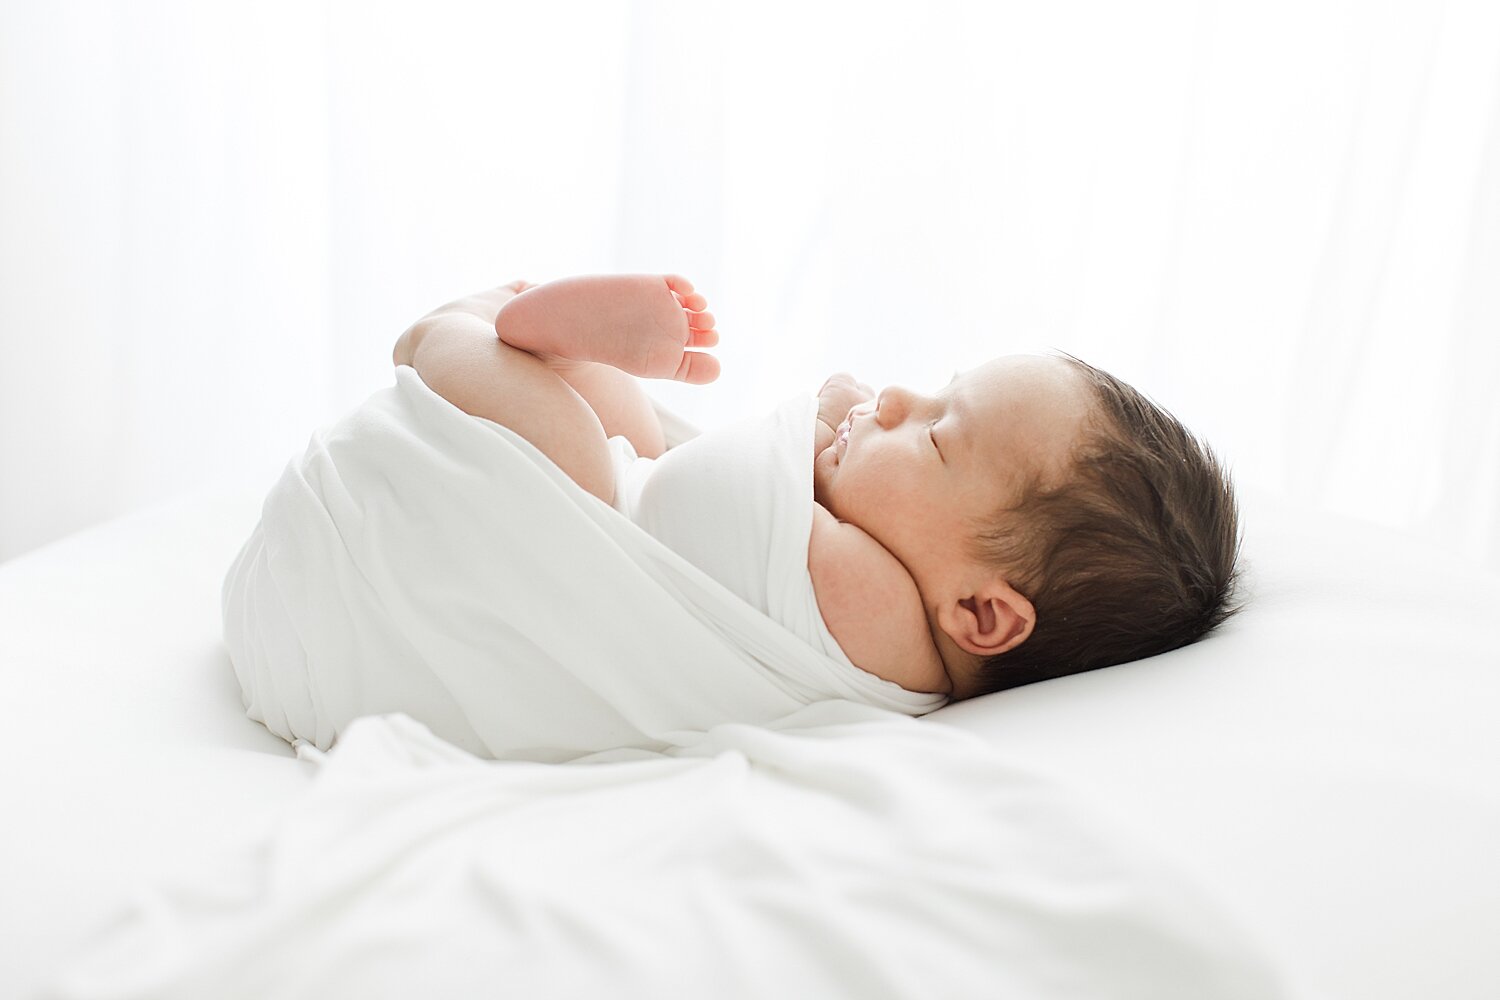 Classic newborn photo of baby swaddled in white. Photo by Kristin Wood Photography.